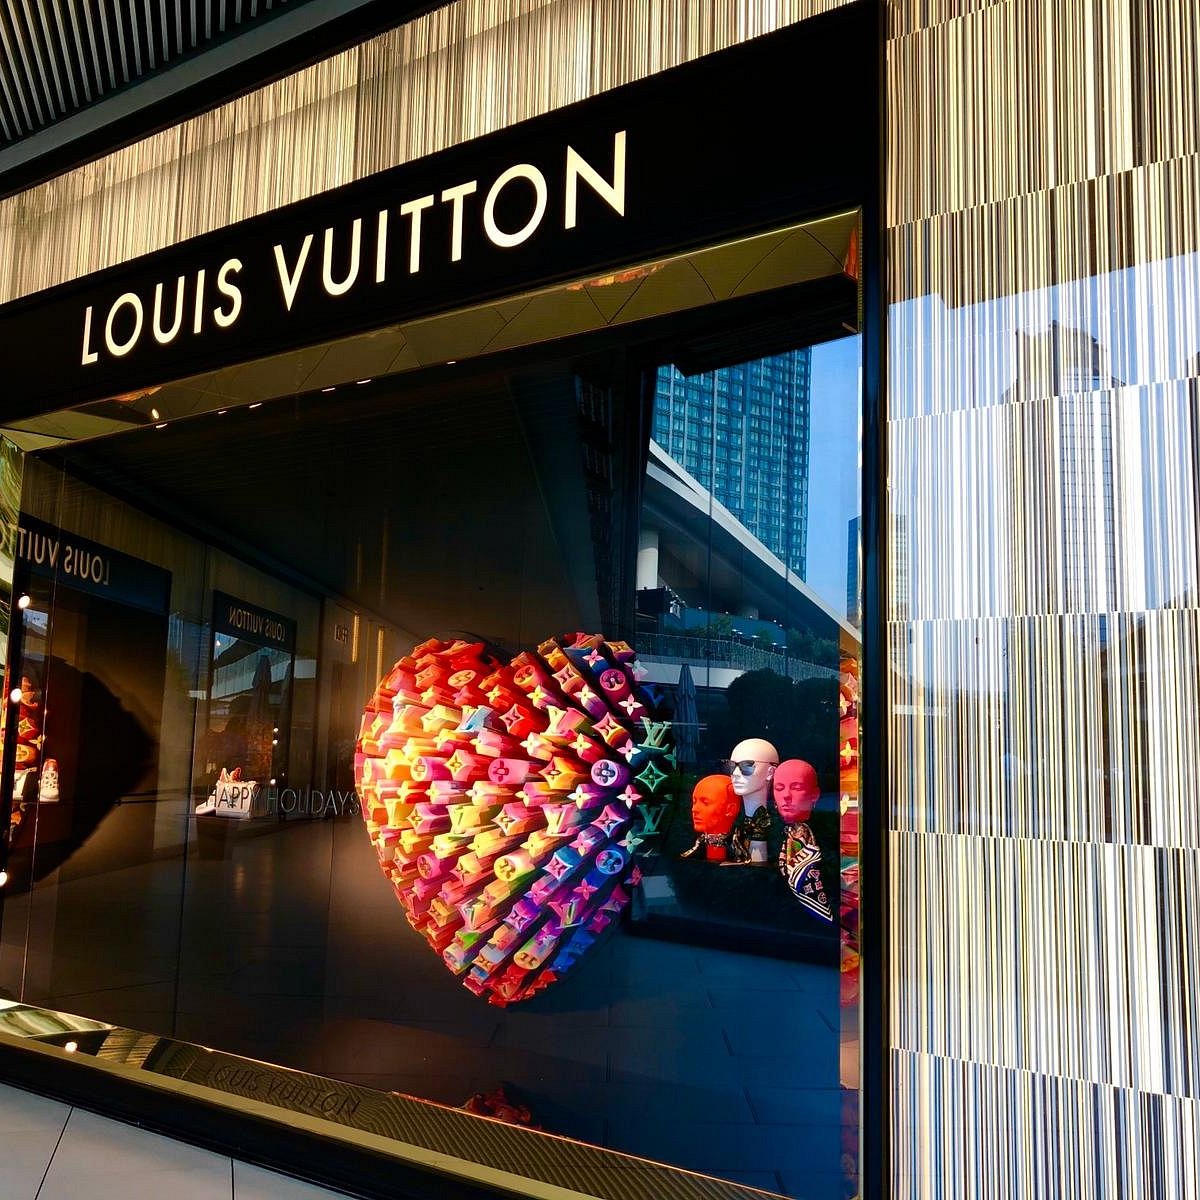 Louis Vuitton - All You Need to Know BEFORE You Go (with Photos)